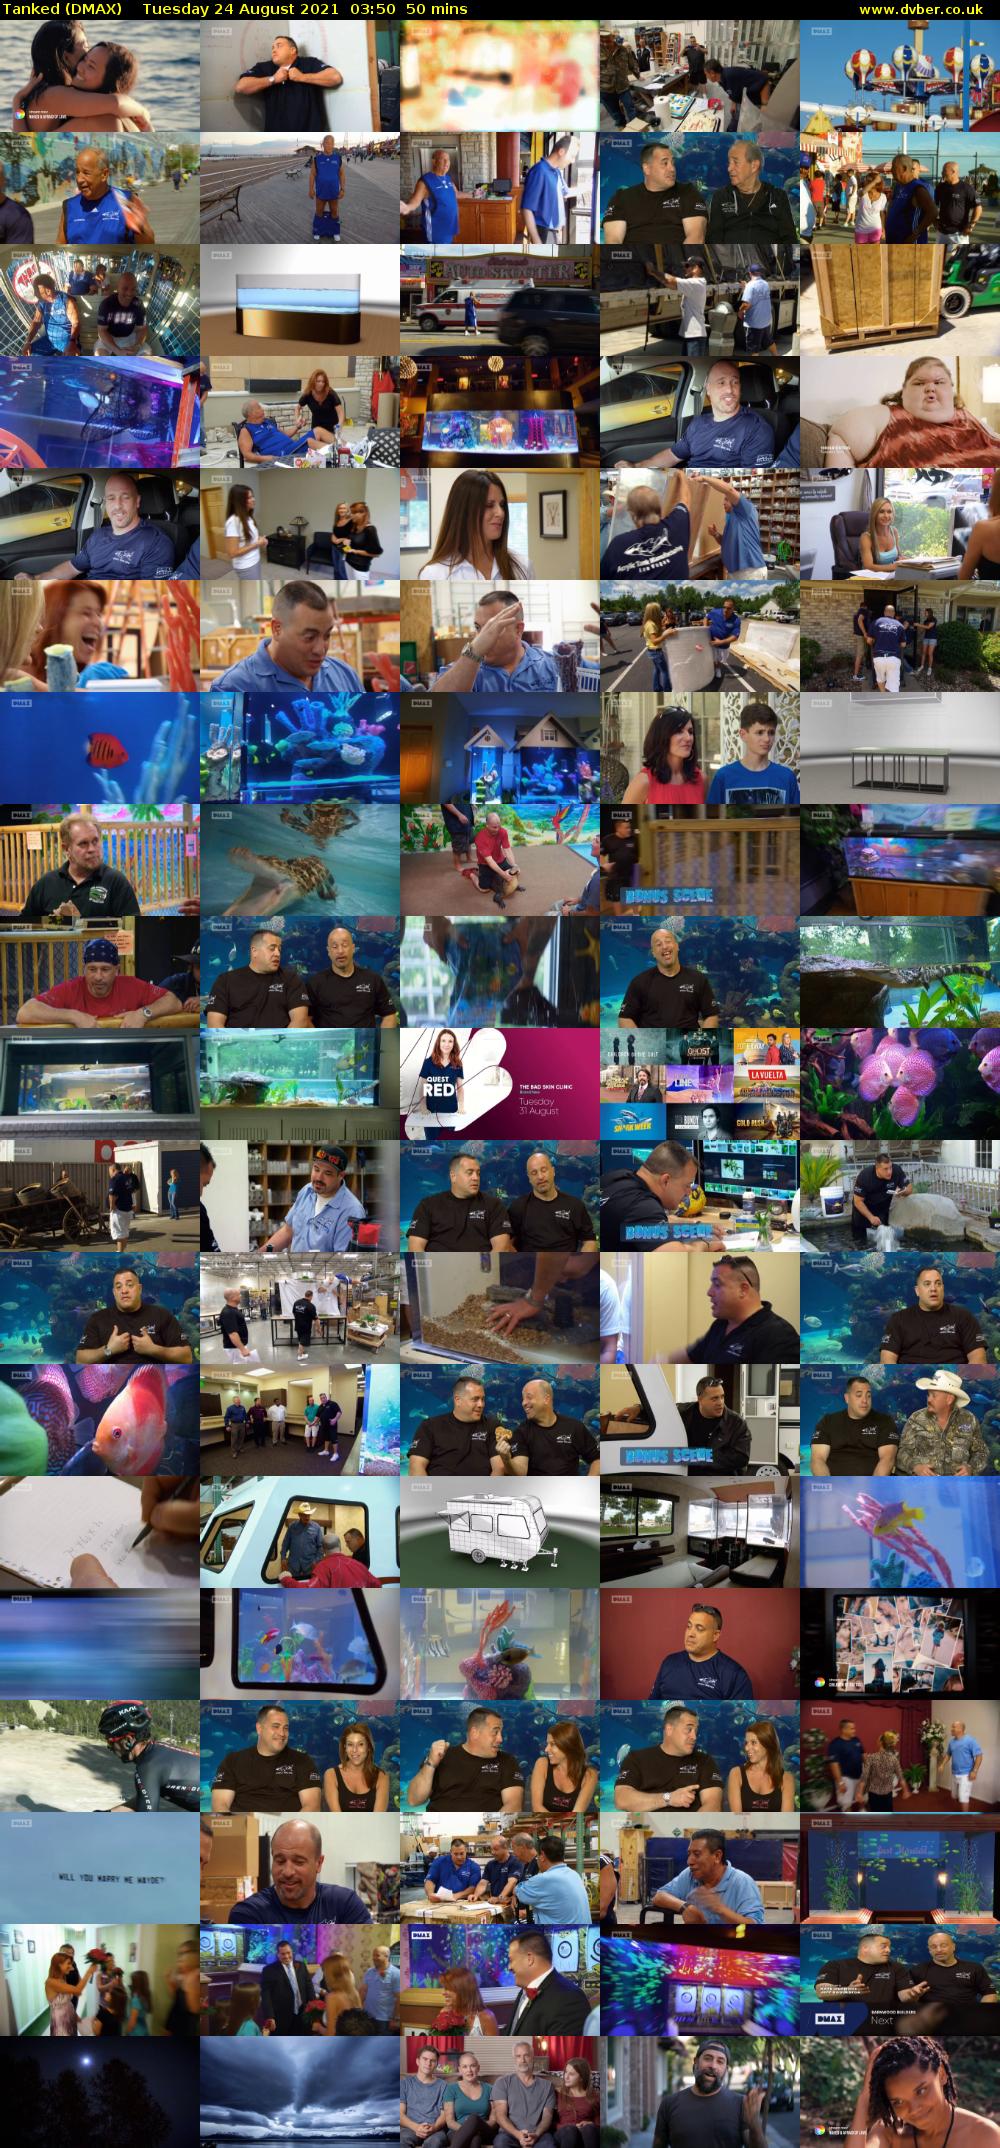 Tanked (DMAX) Tuesday 24 August 2021 03:50 - 04:40